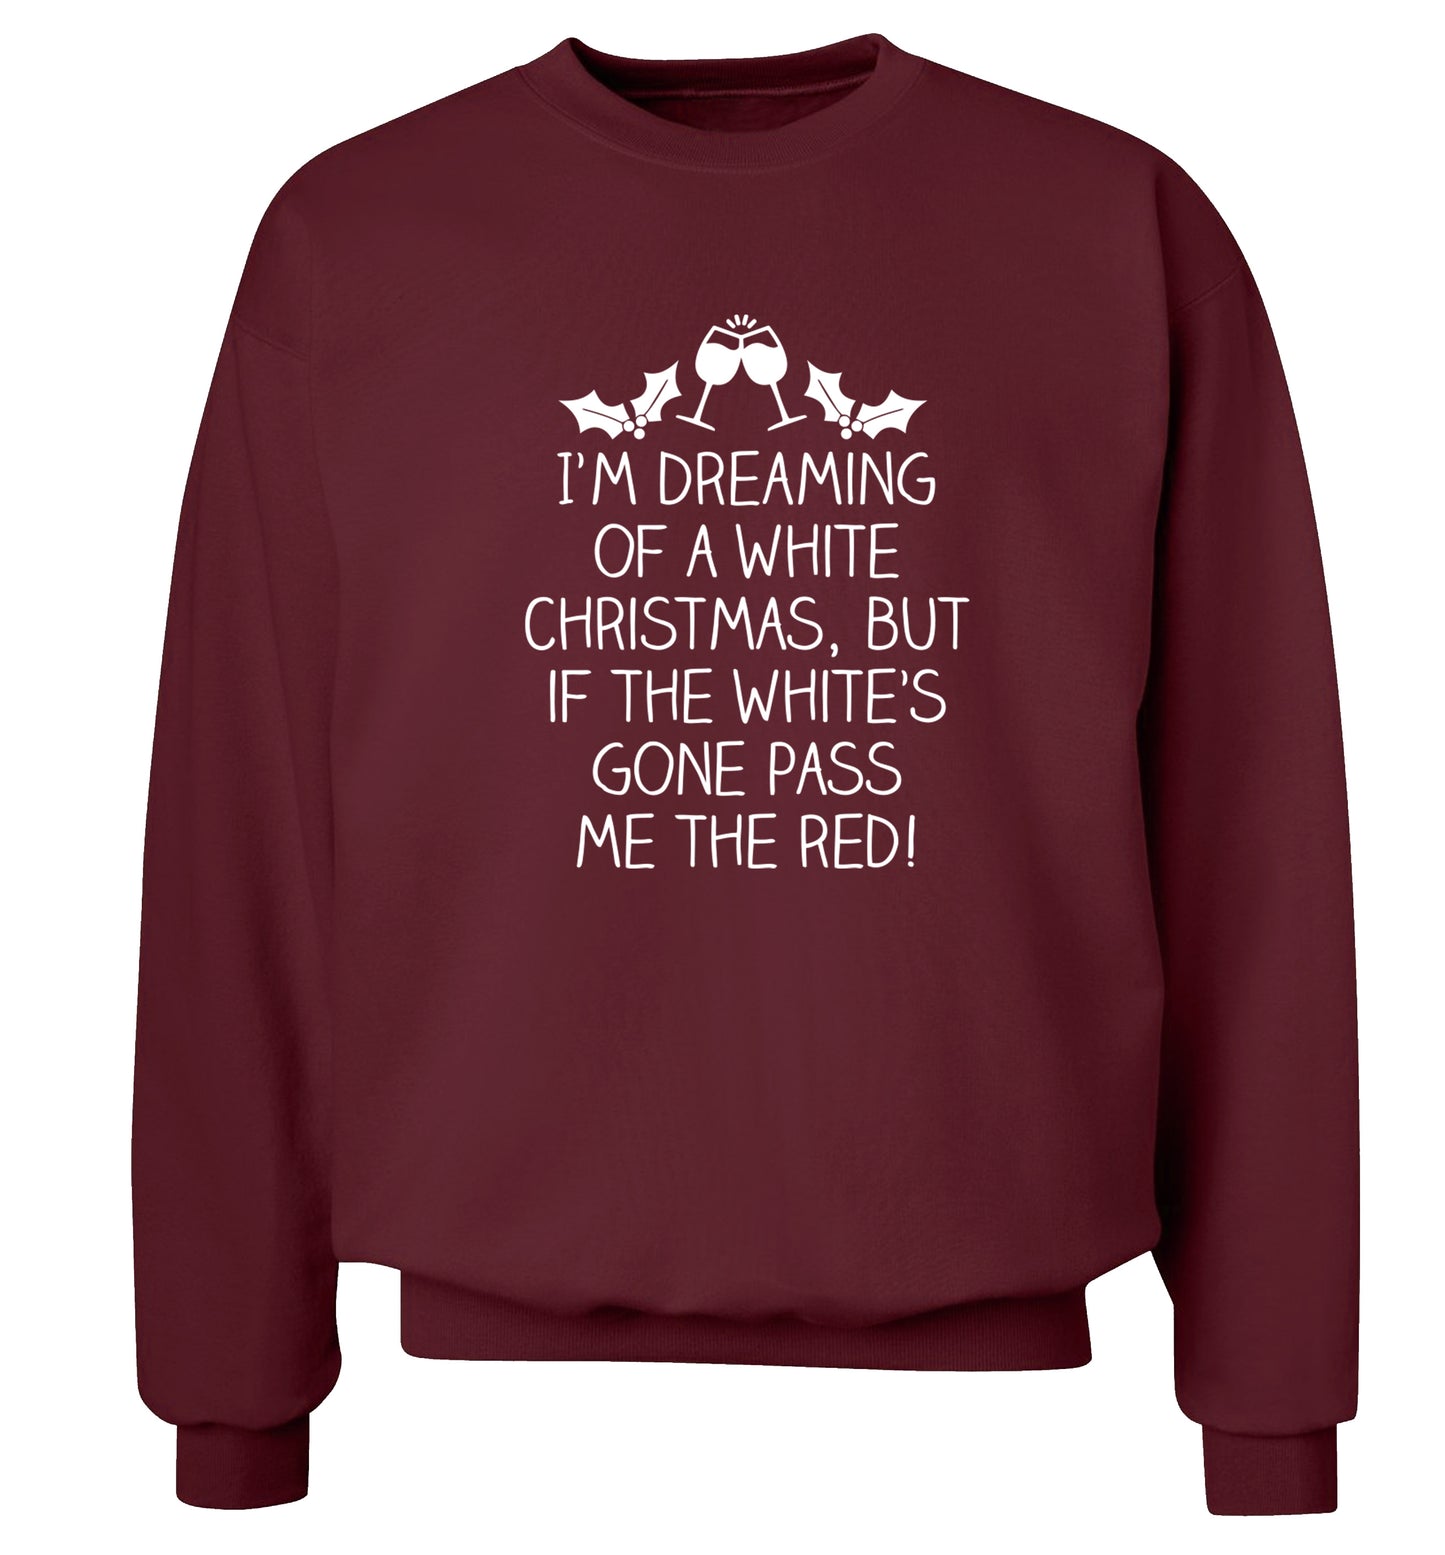 I'm dreaming of a white christmas, but if the white's gone pass me the red! Adult's unisex maroon Sweater 2XL